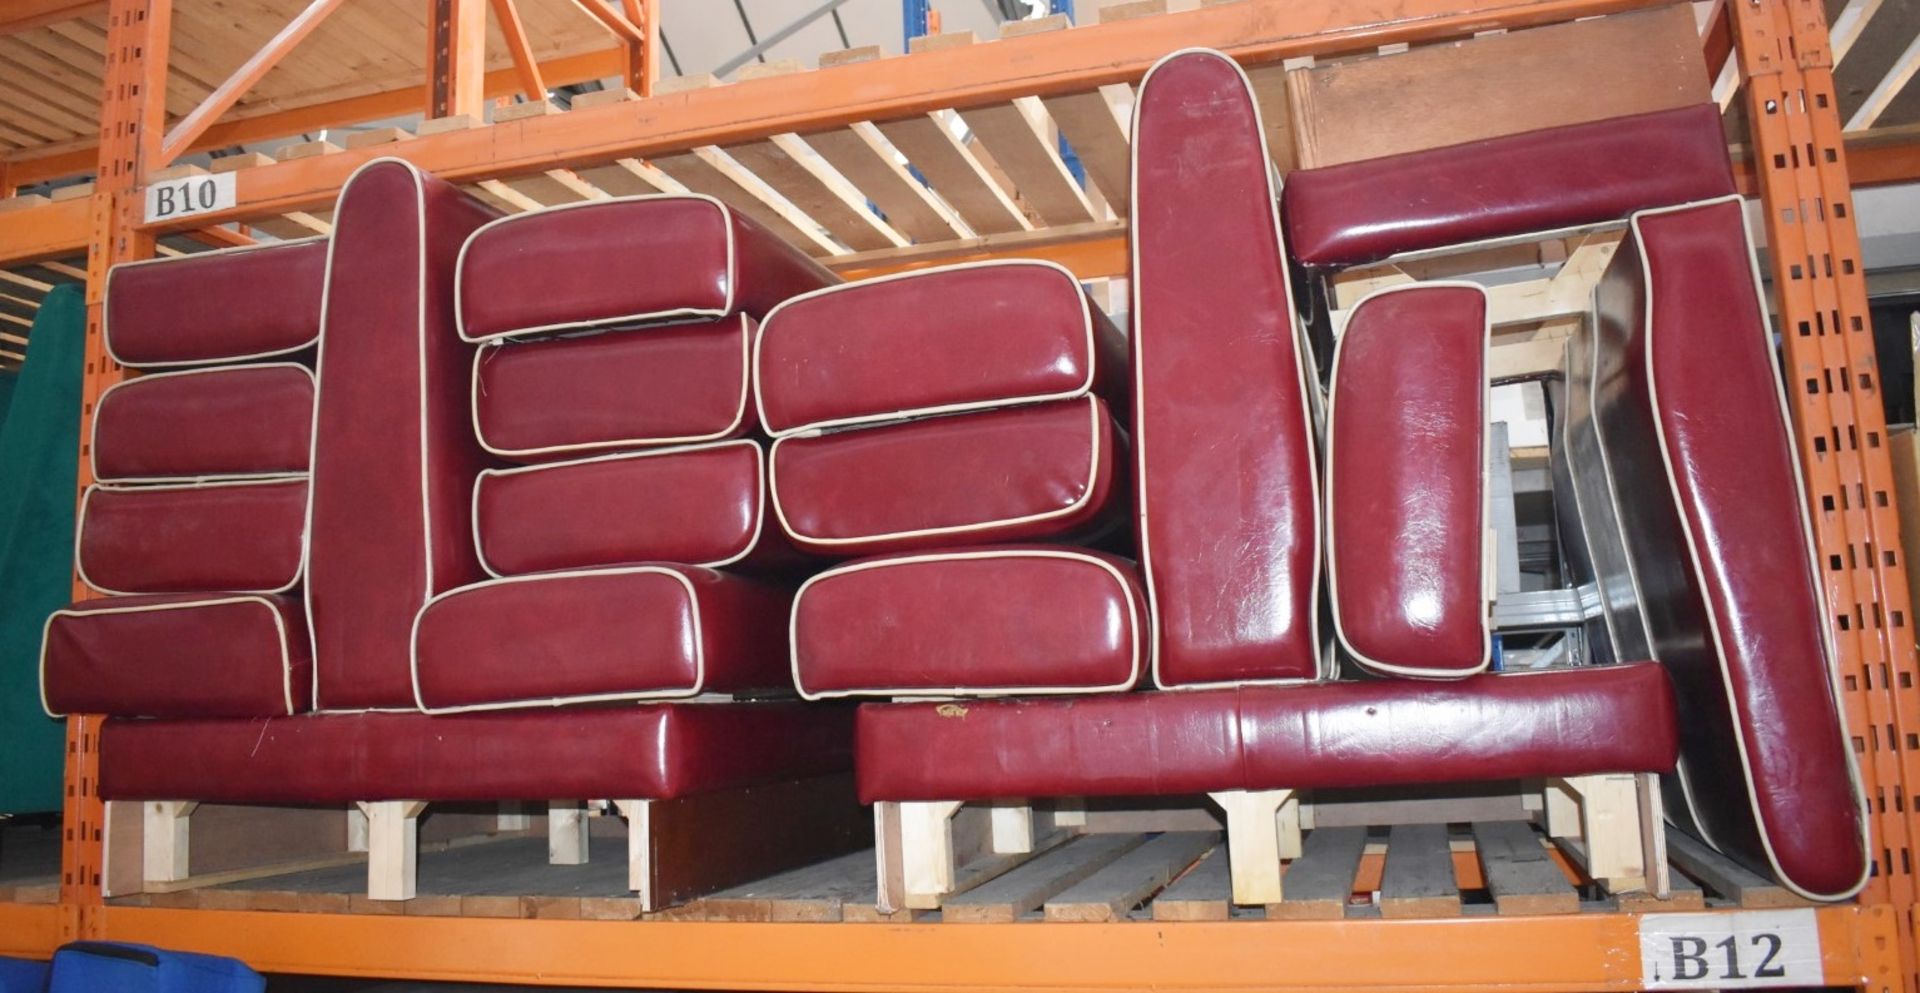 Collection of Retro 1950's Style American Diner Seating - Includes 5 x Double Back to Back - Image 2 of 3